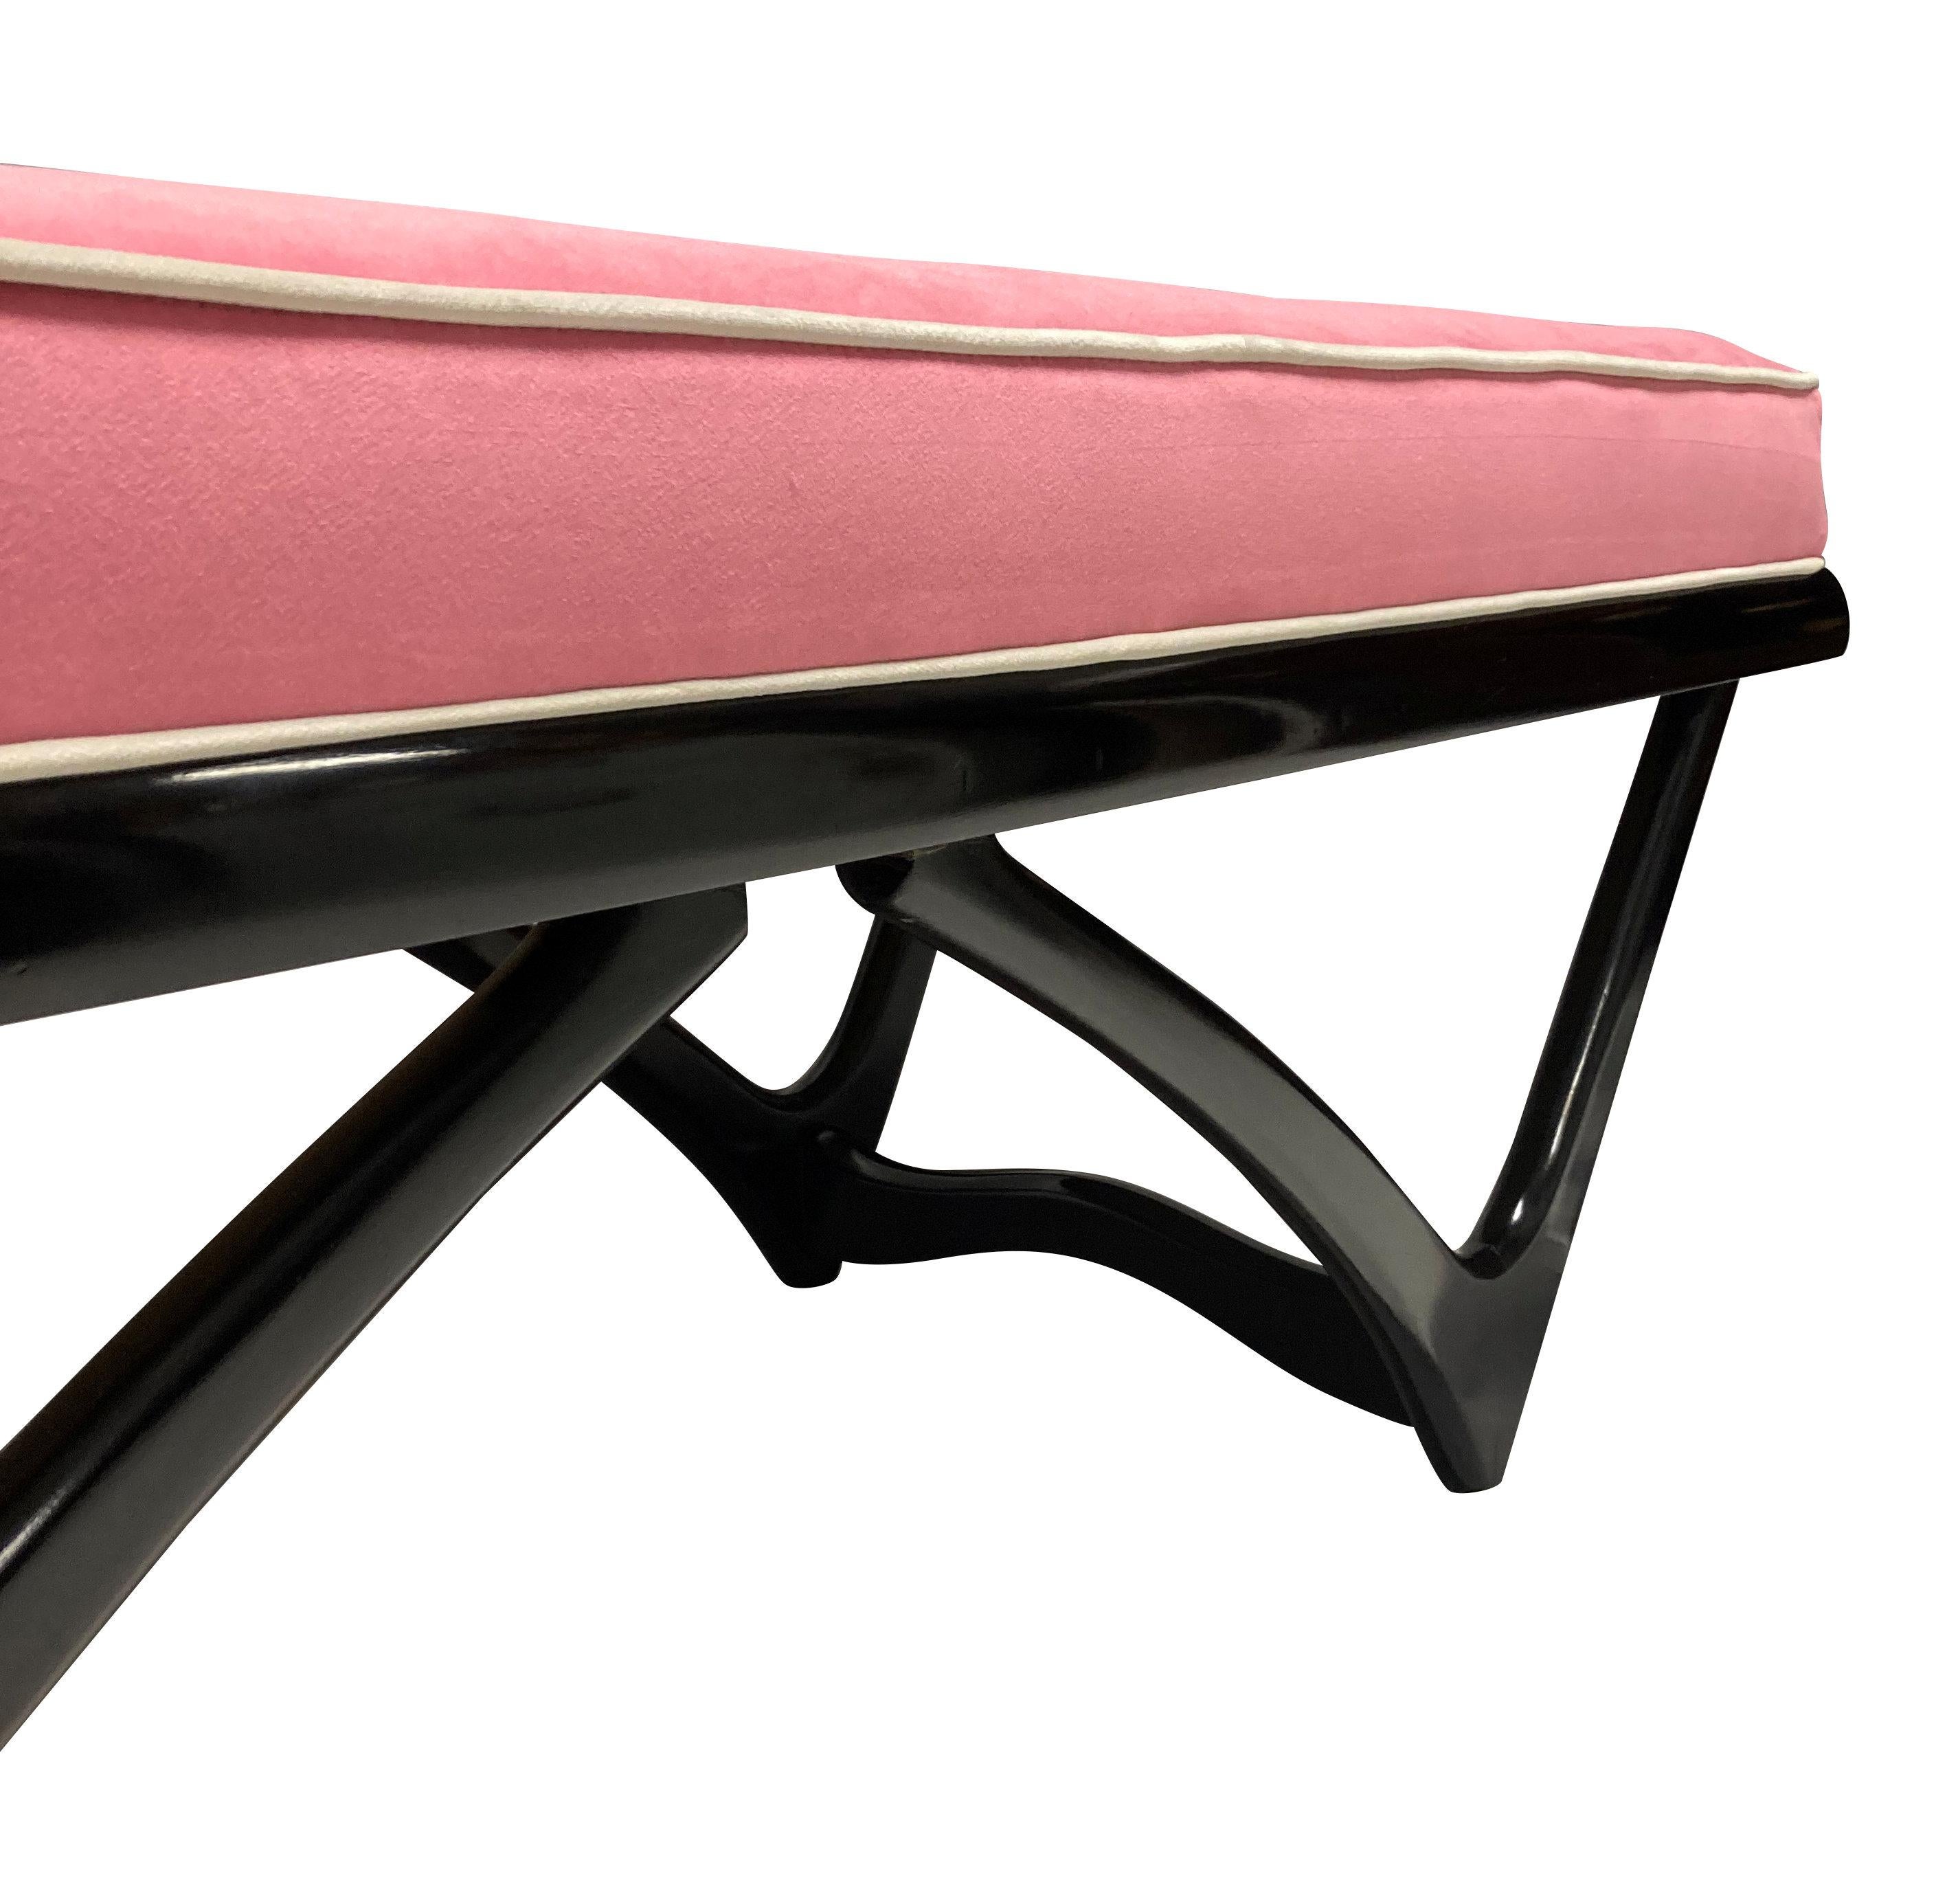 A large Italian Mid-Century bench of sculptural design in the manner of Carlo Mollino. Black lacquered and newly upholstered in bubble-gum pink velvet with cream detailing.